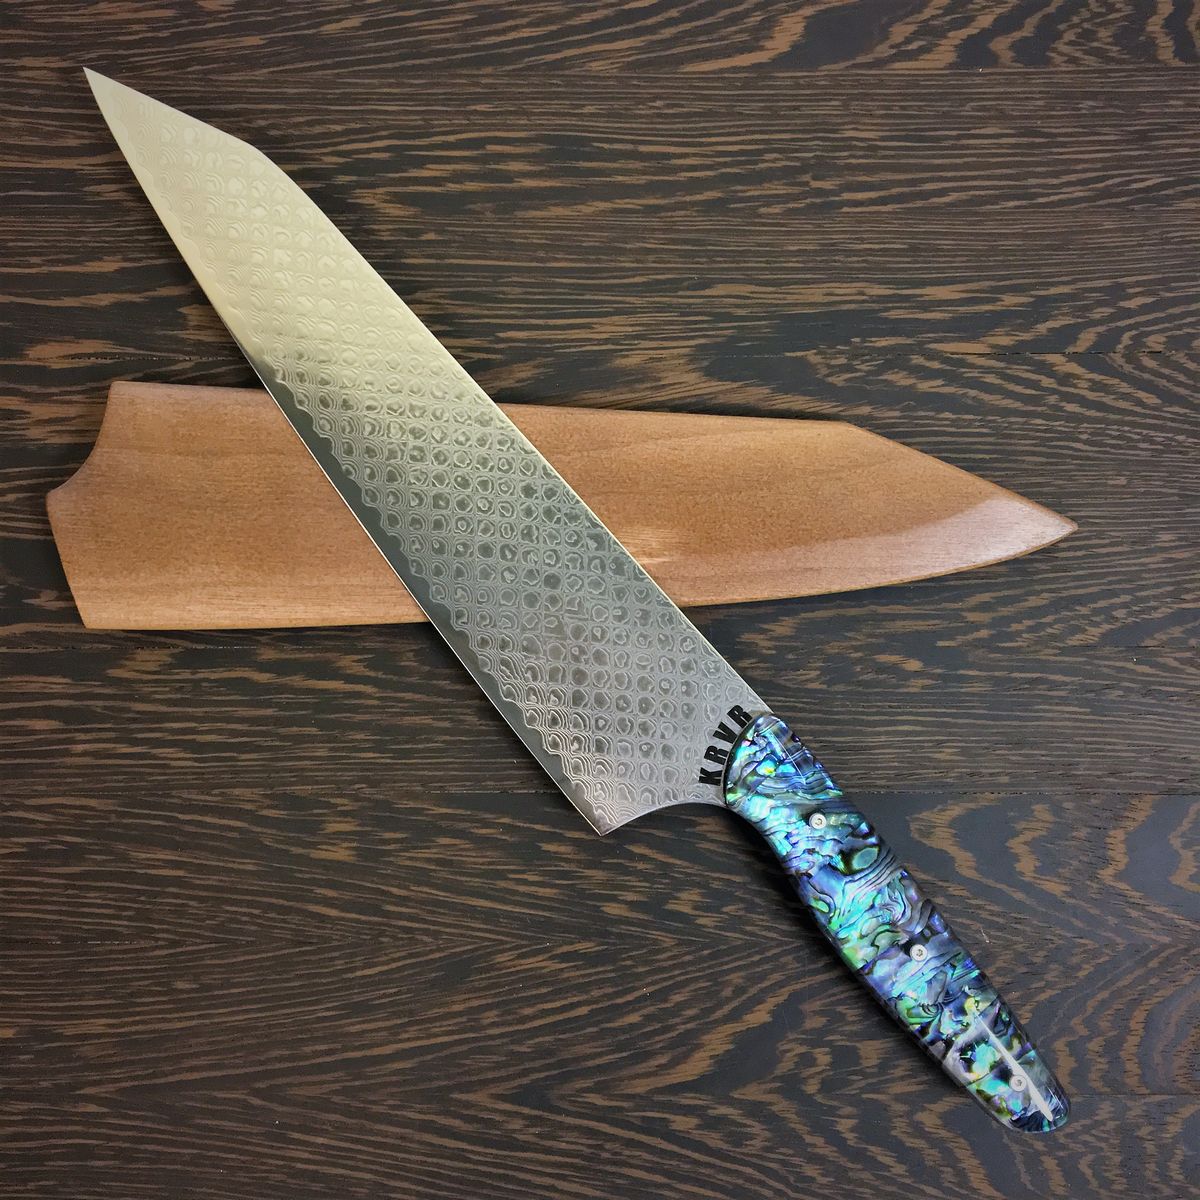 Son of a Pearl III - Gyuto K-tip 10in Chef's Knife - Paua Abalone Handle - Fishscale Damascus Blade